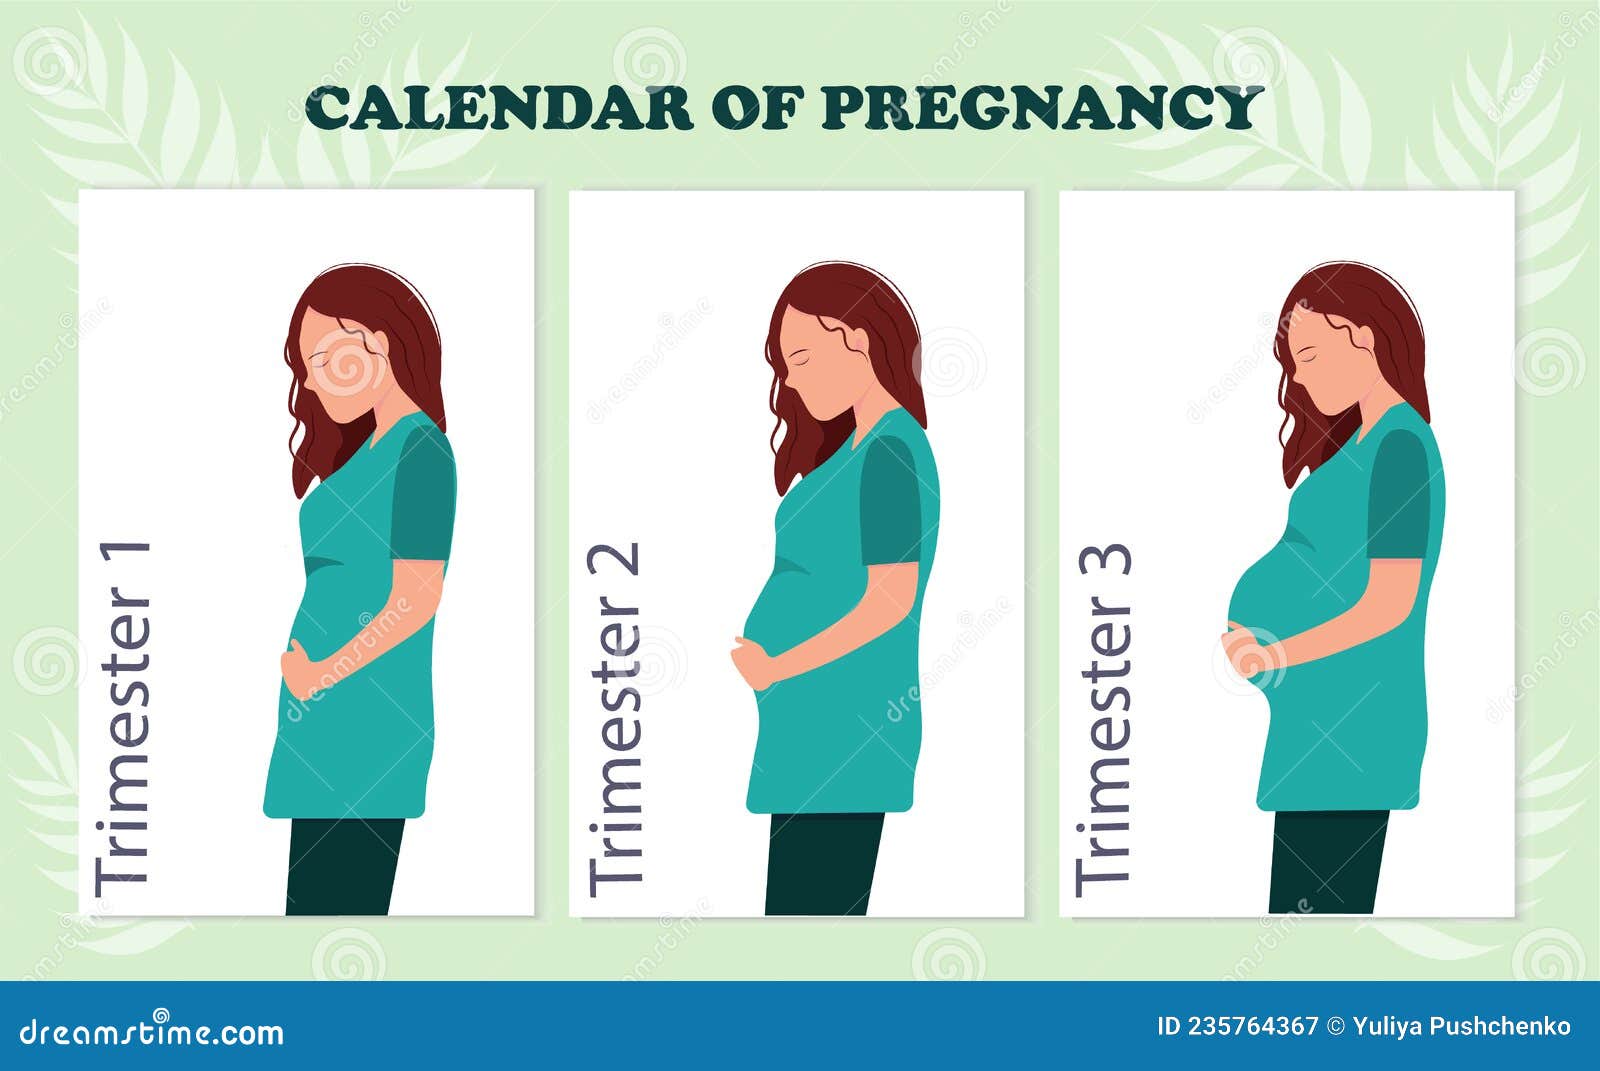 How Many Trimesters Are In A Pregnancy?